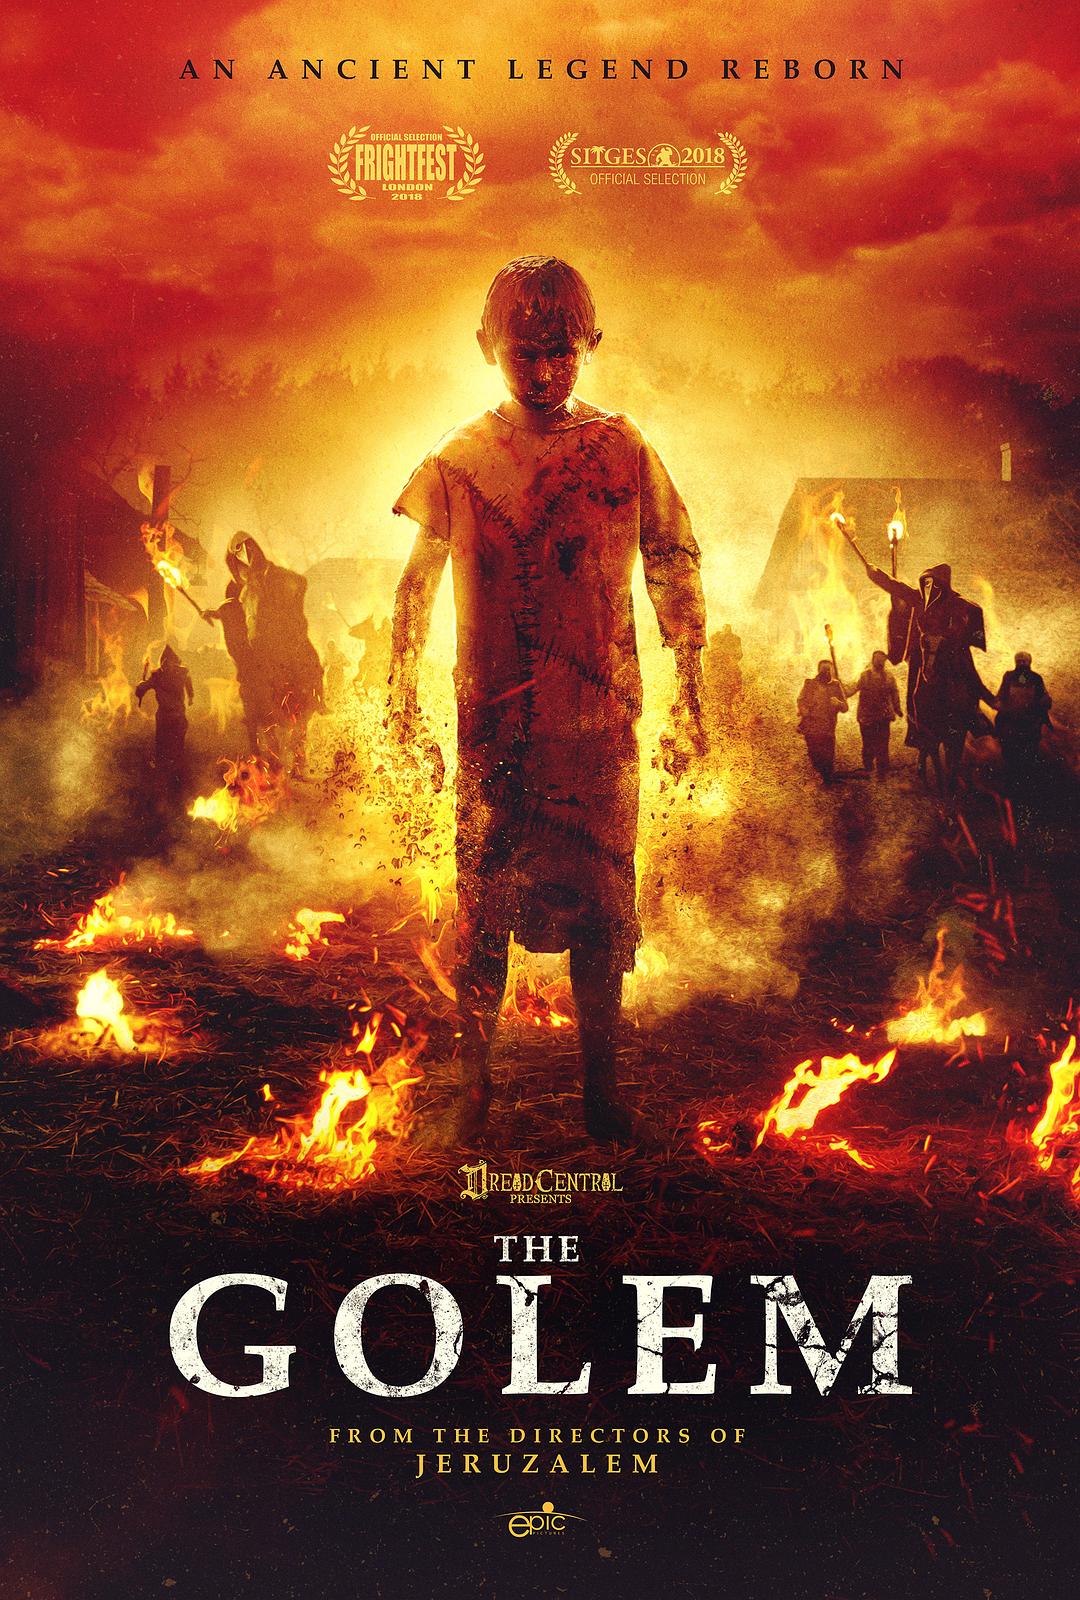 / The.Golem.2018.1080p.BluRay.x264.DTS-FGT 8.13GB-1.png